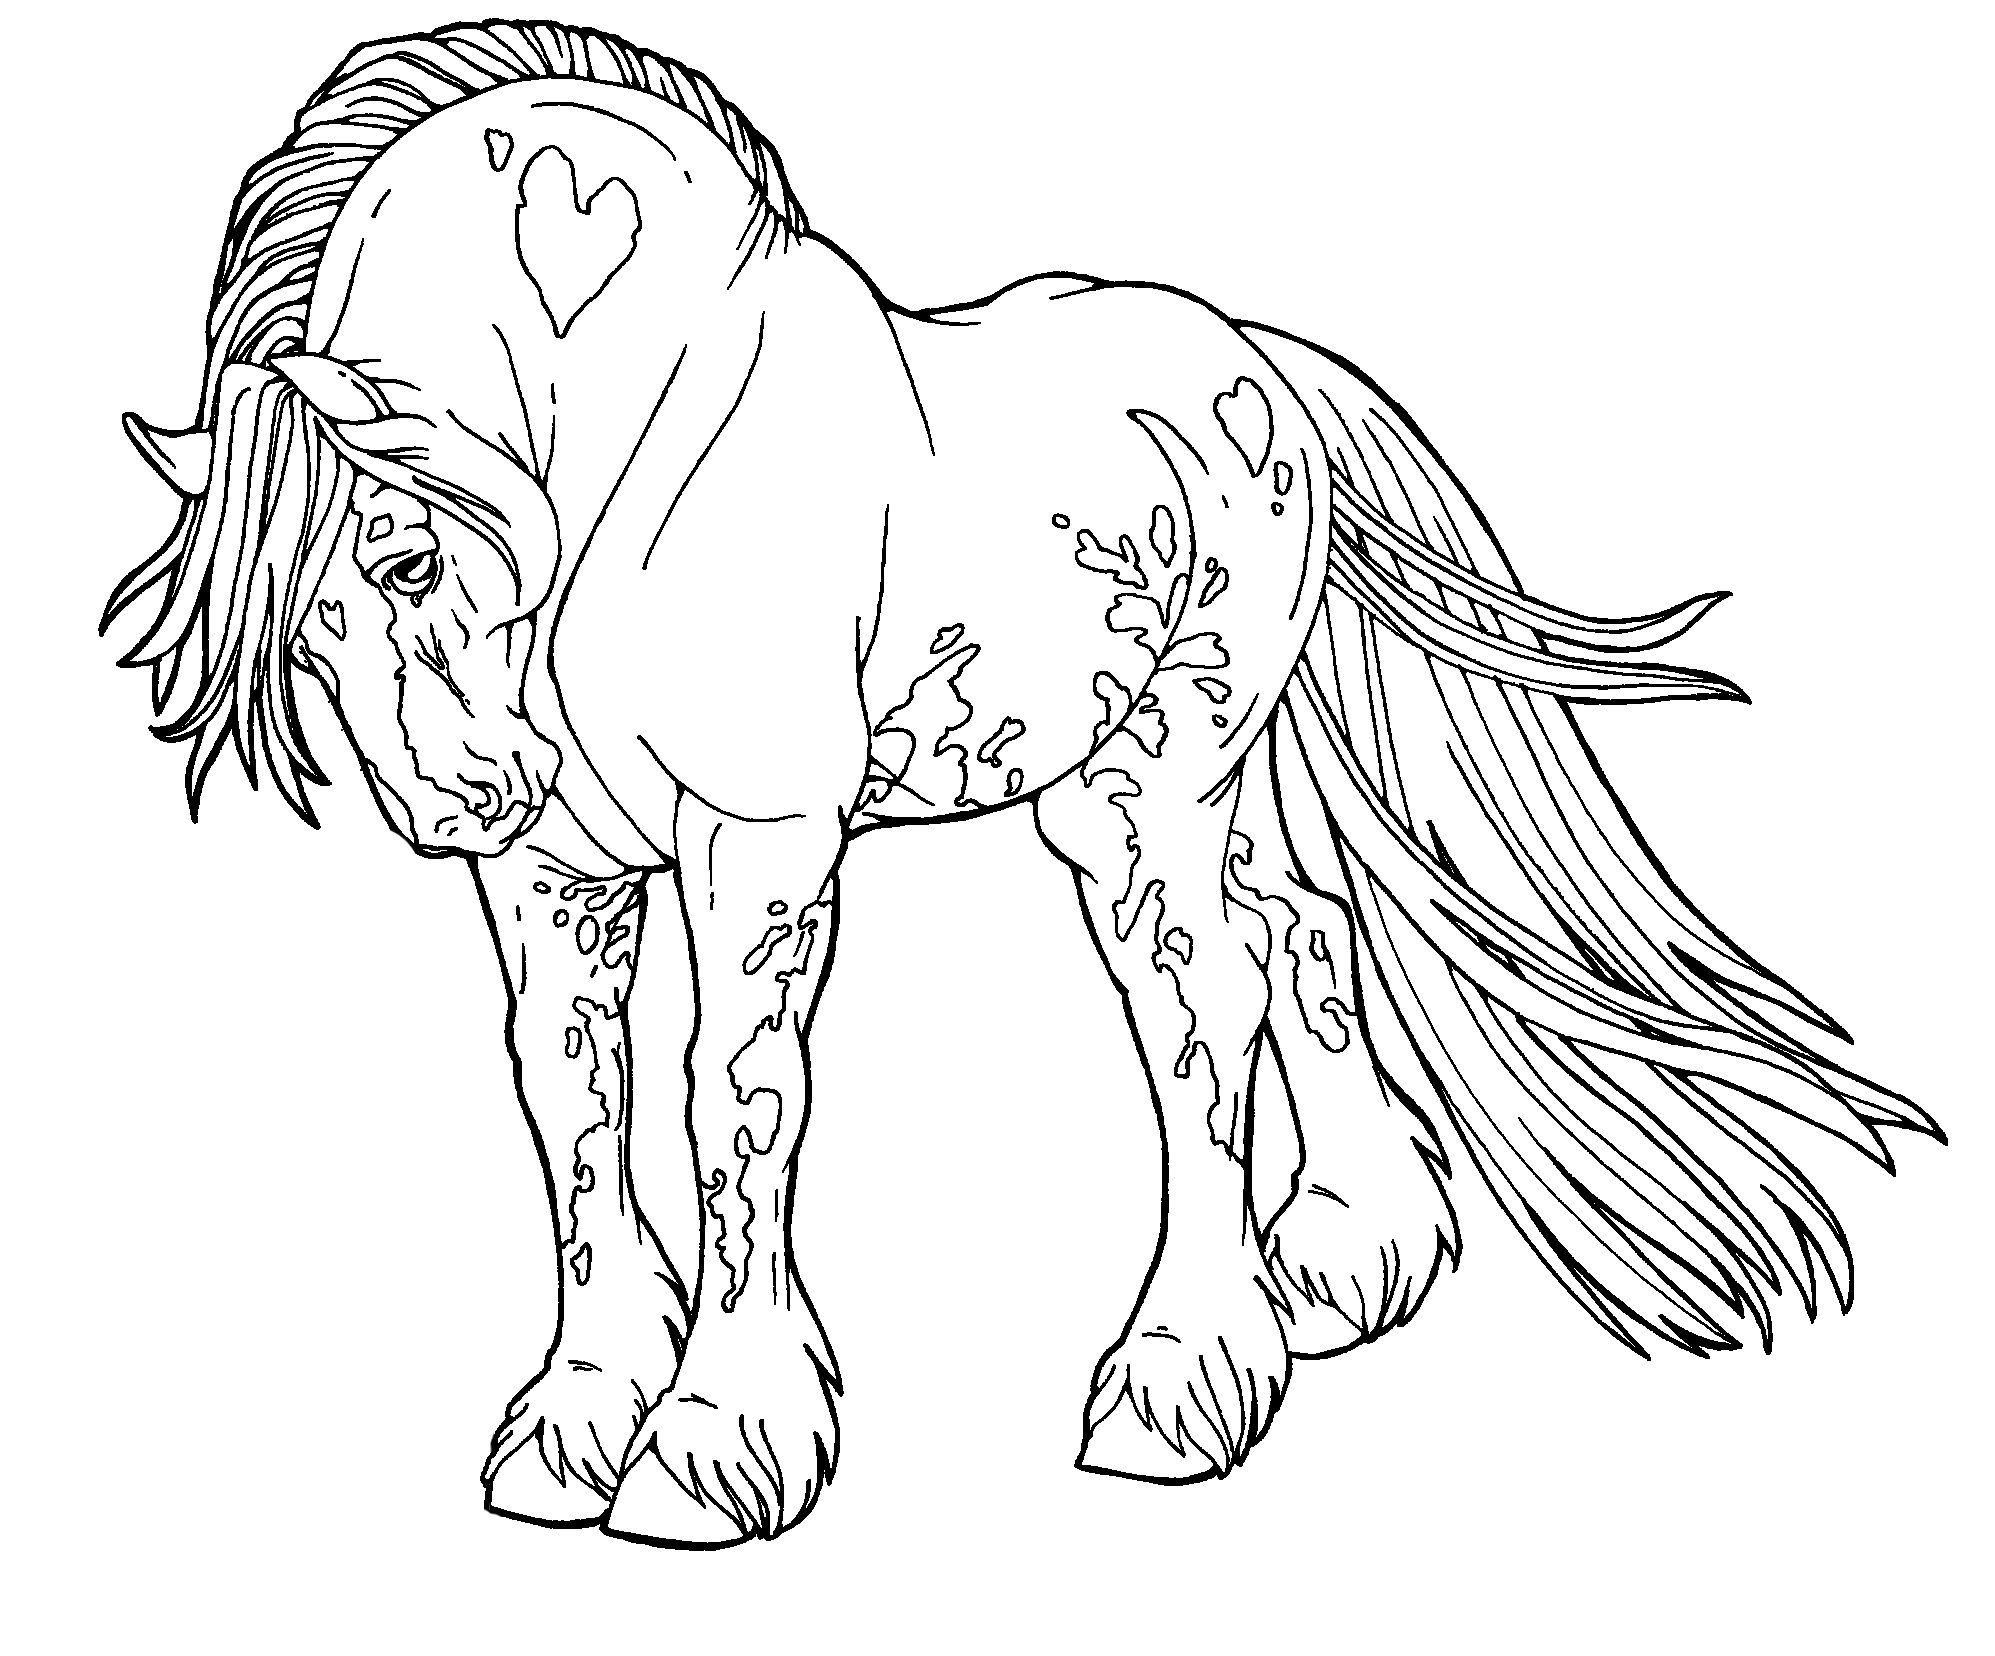 Free Lines-Gypsy Drum Horse by AppleHunter on deviantART | Horse coloring  pages, Horse coloring, Animal coloring pages